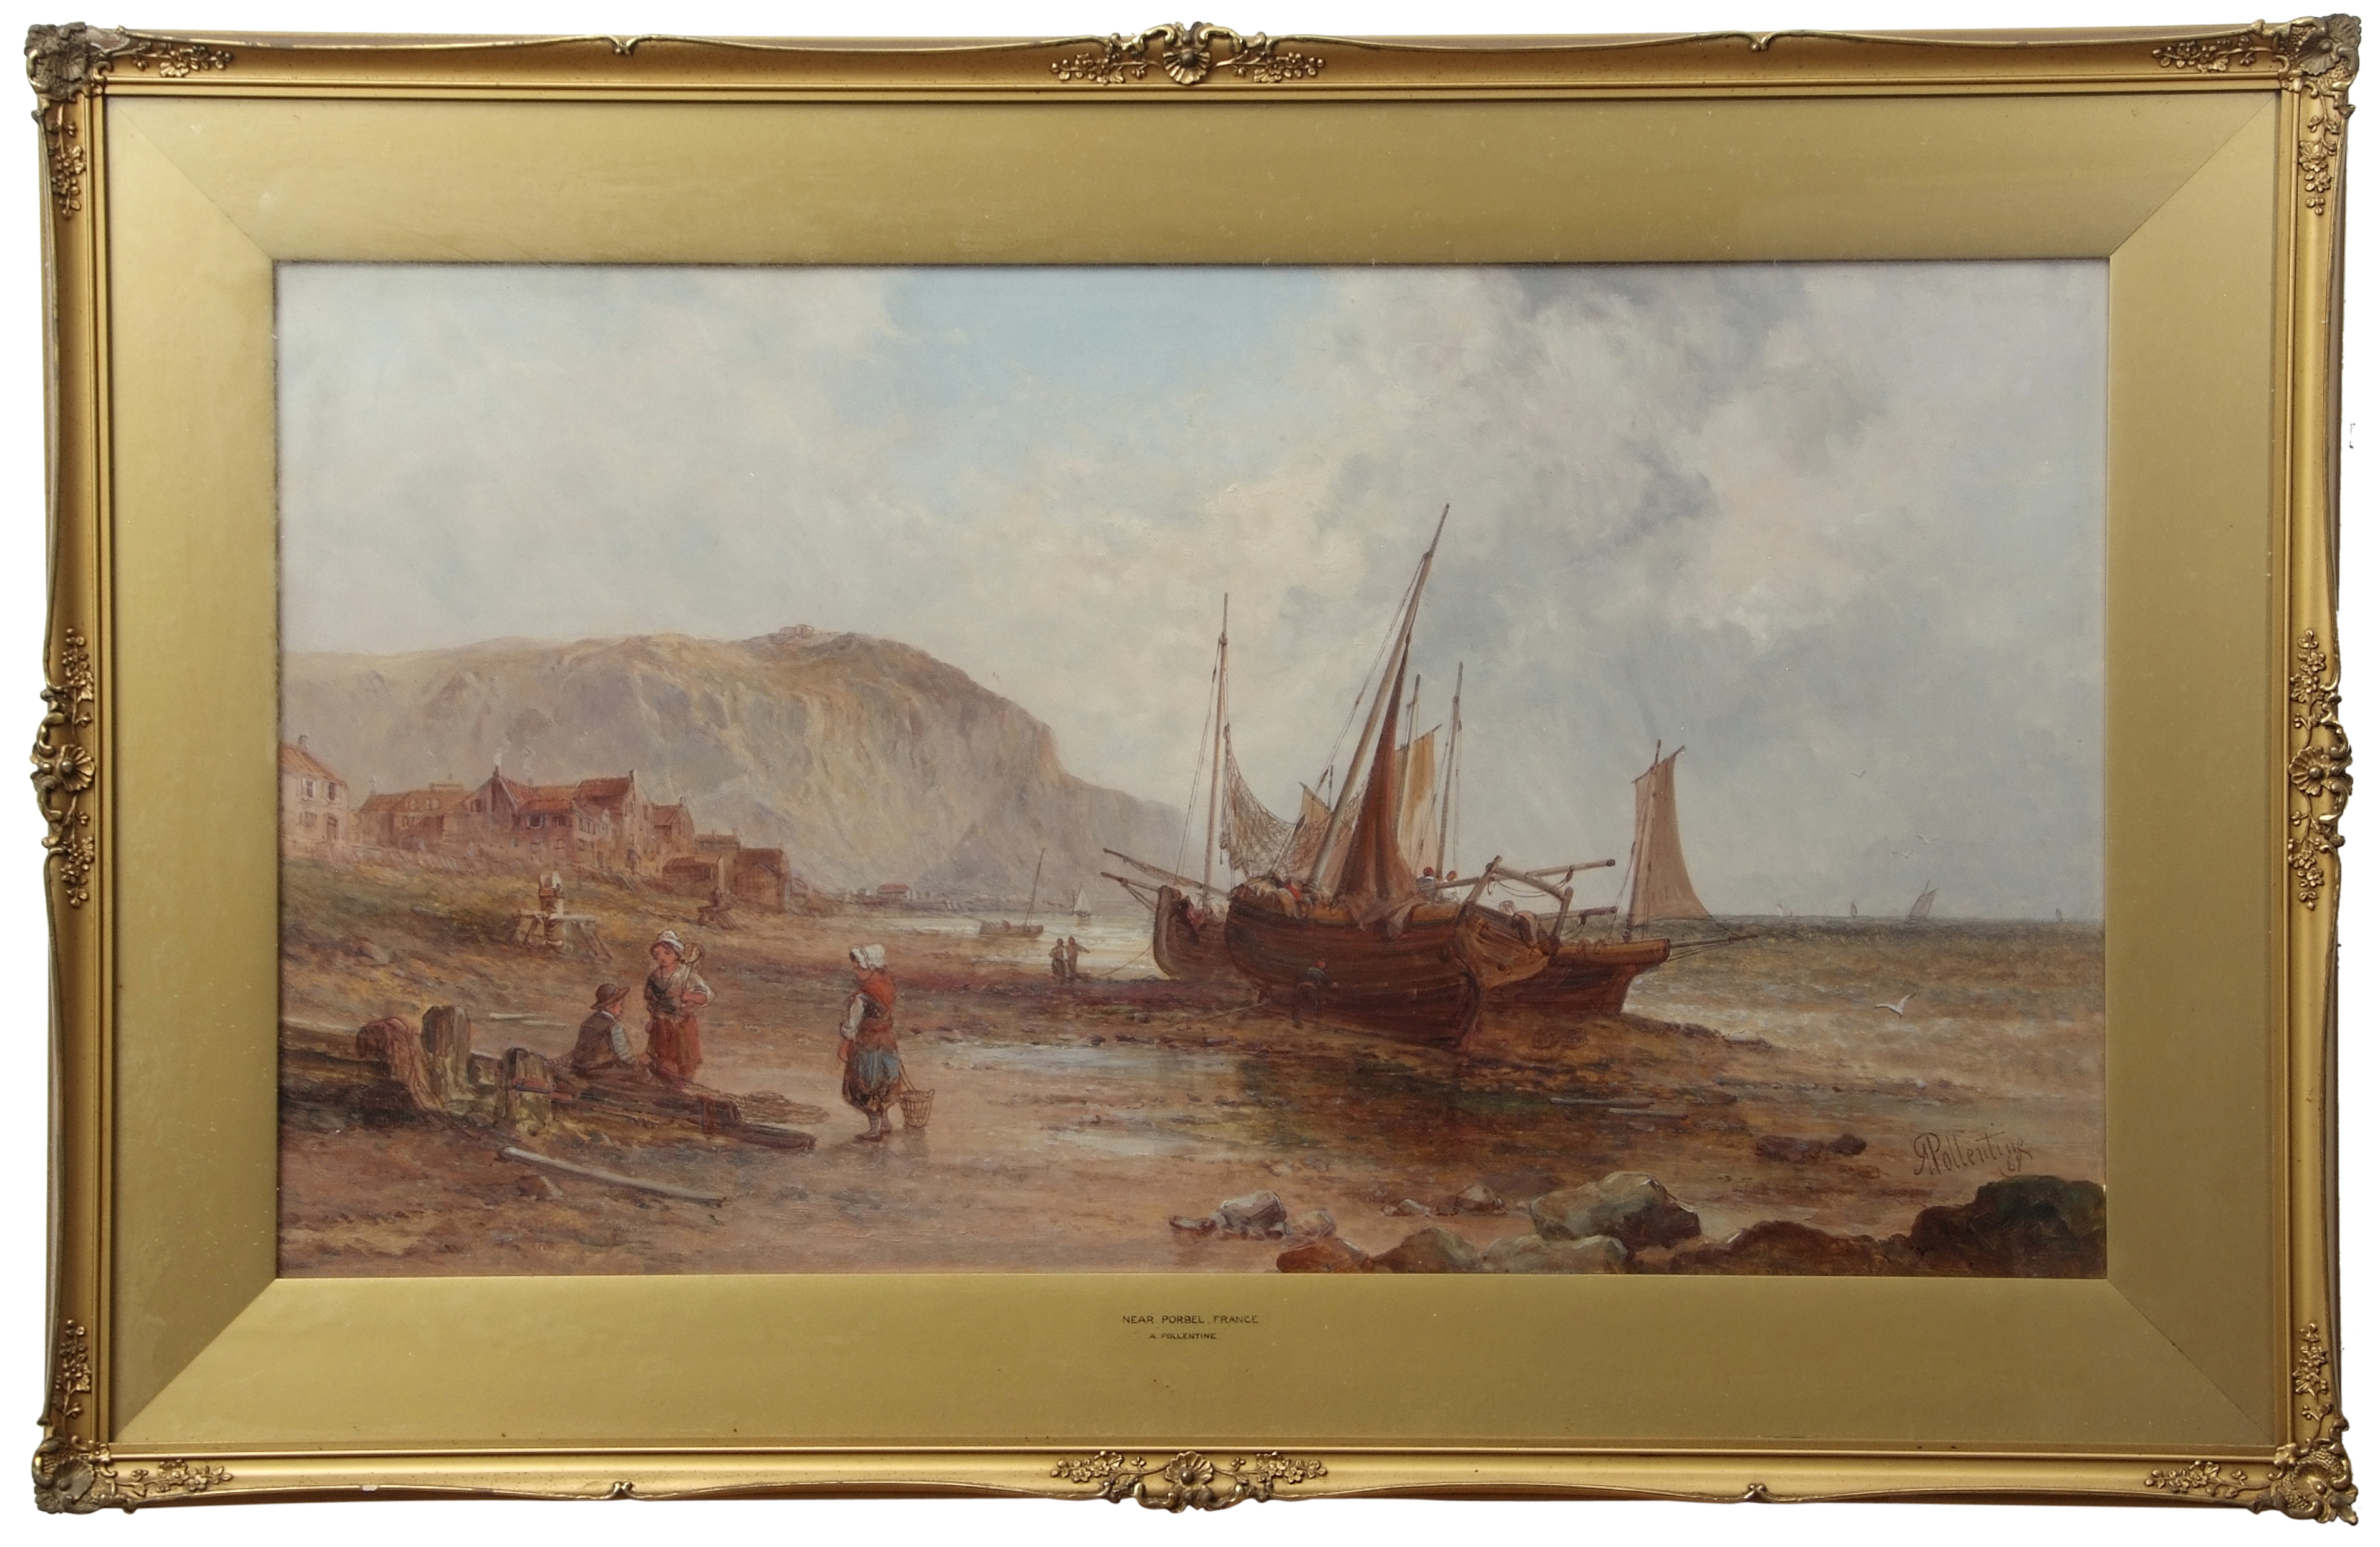 Alfred Pollentine (1836-1890), "Near Porbel, France" and "On the Normandy coast", pair of oils on